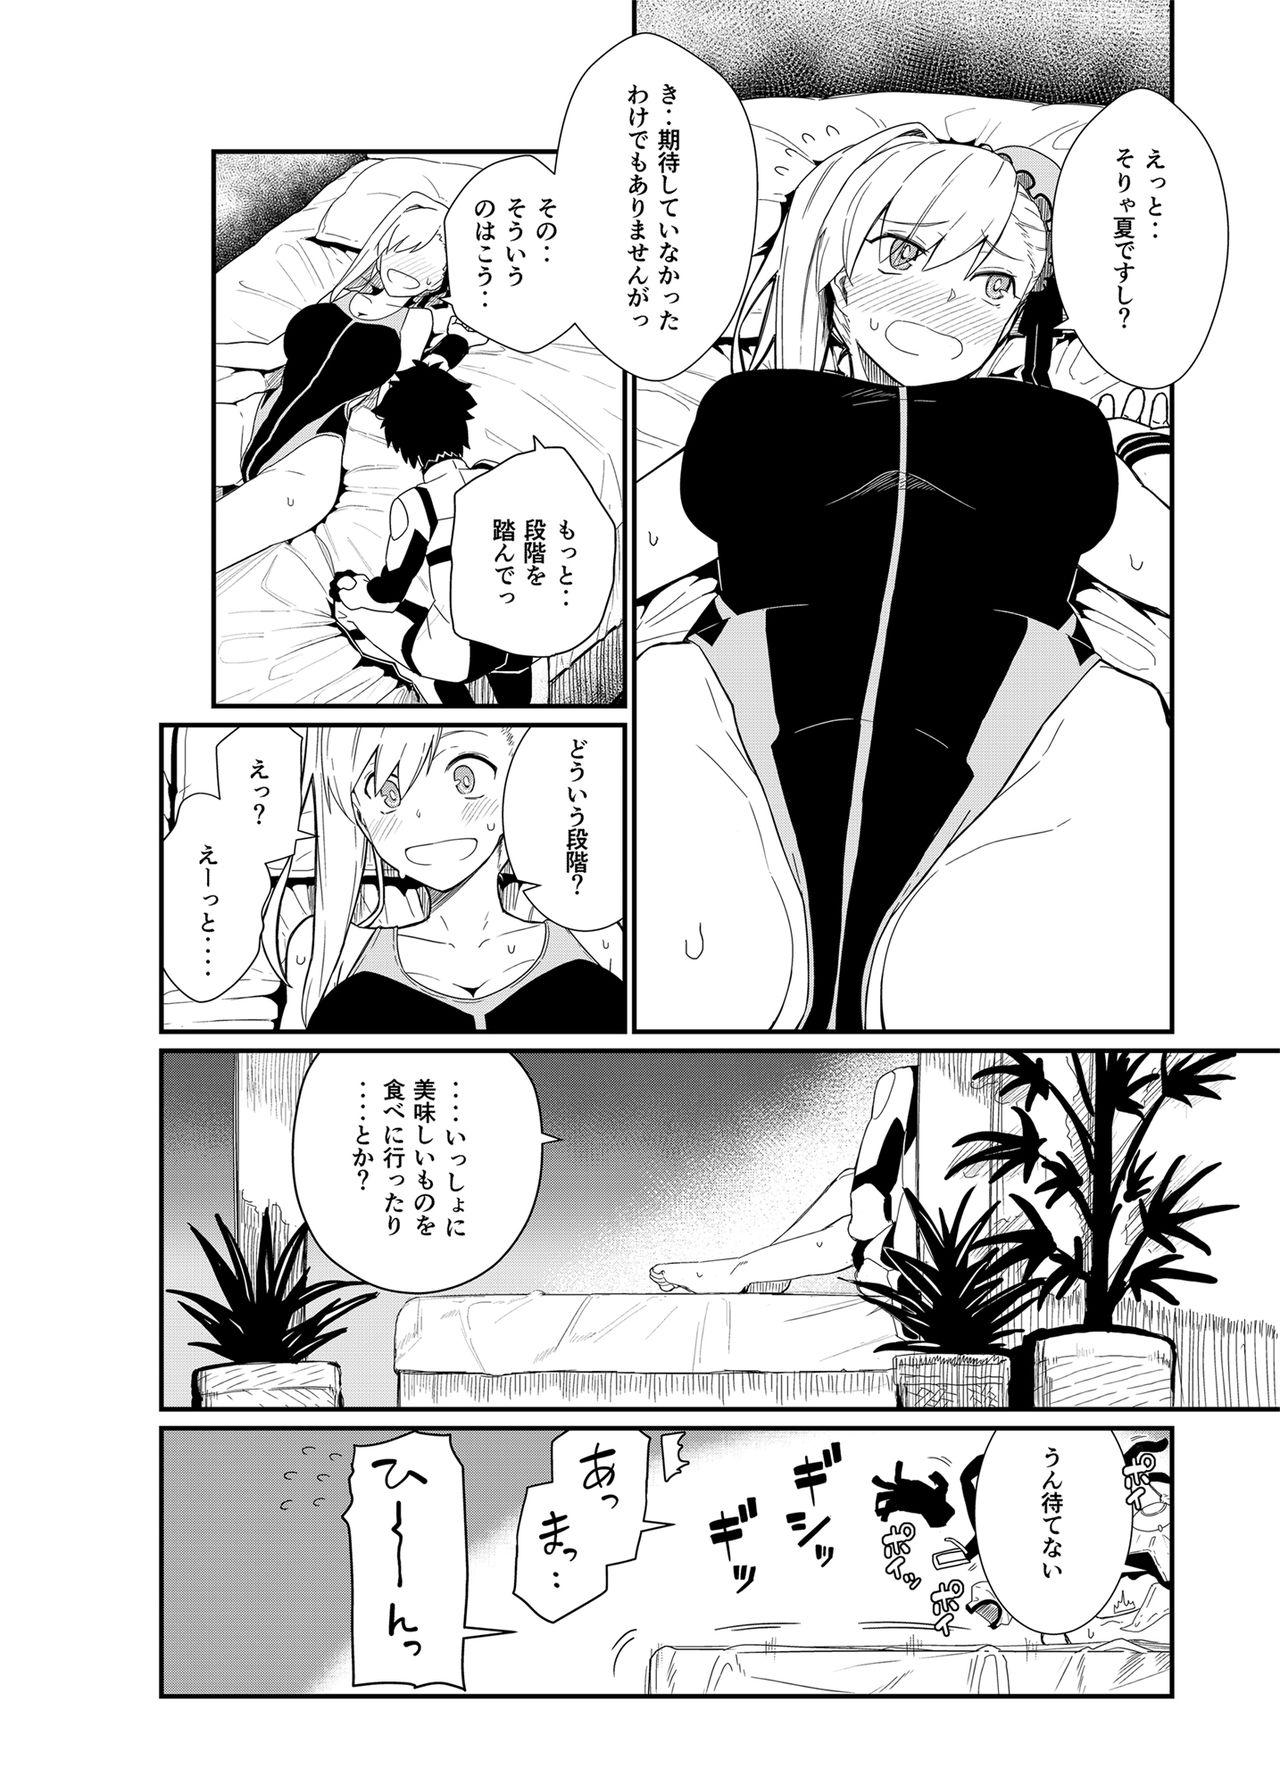 Leche GIRLFriend's 18 - Fate grand order Innocent - Page 6